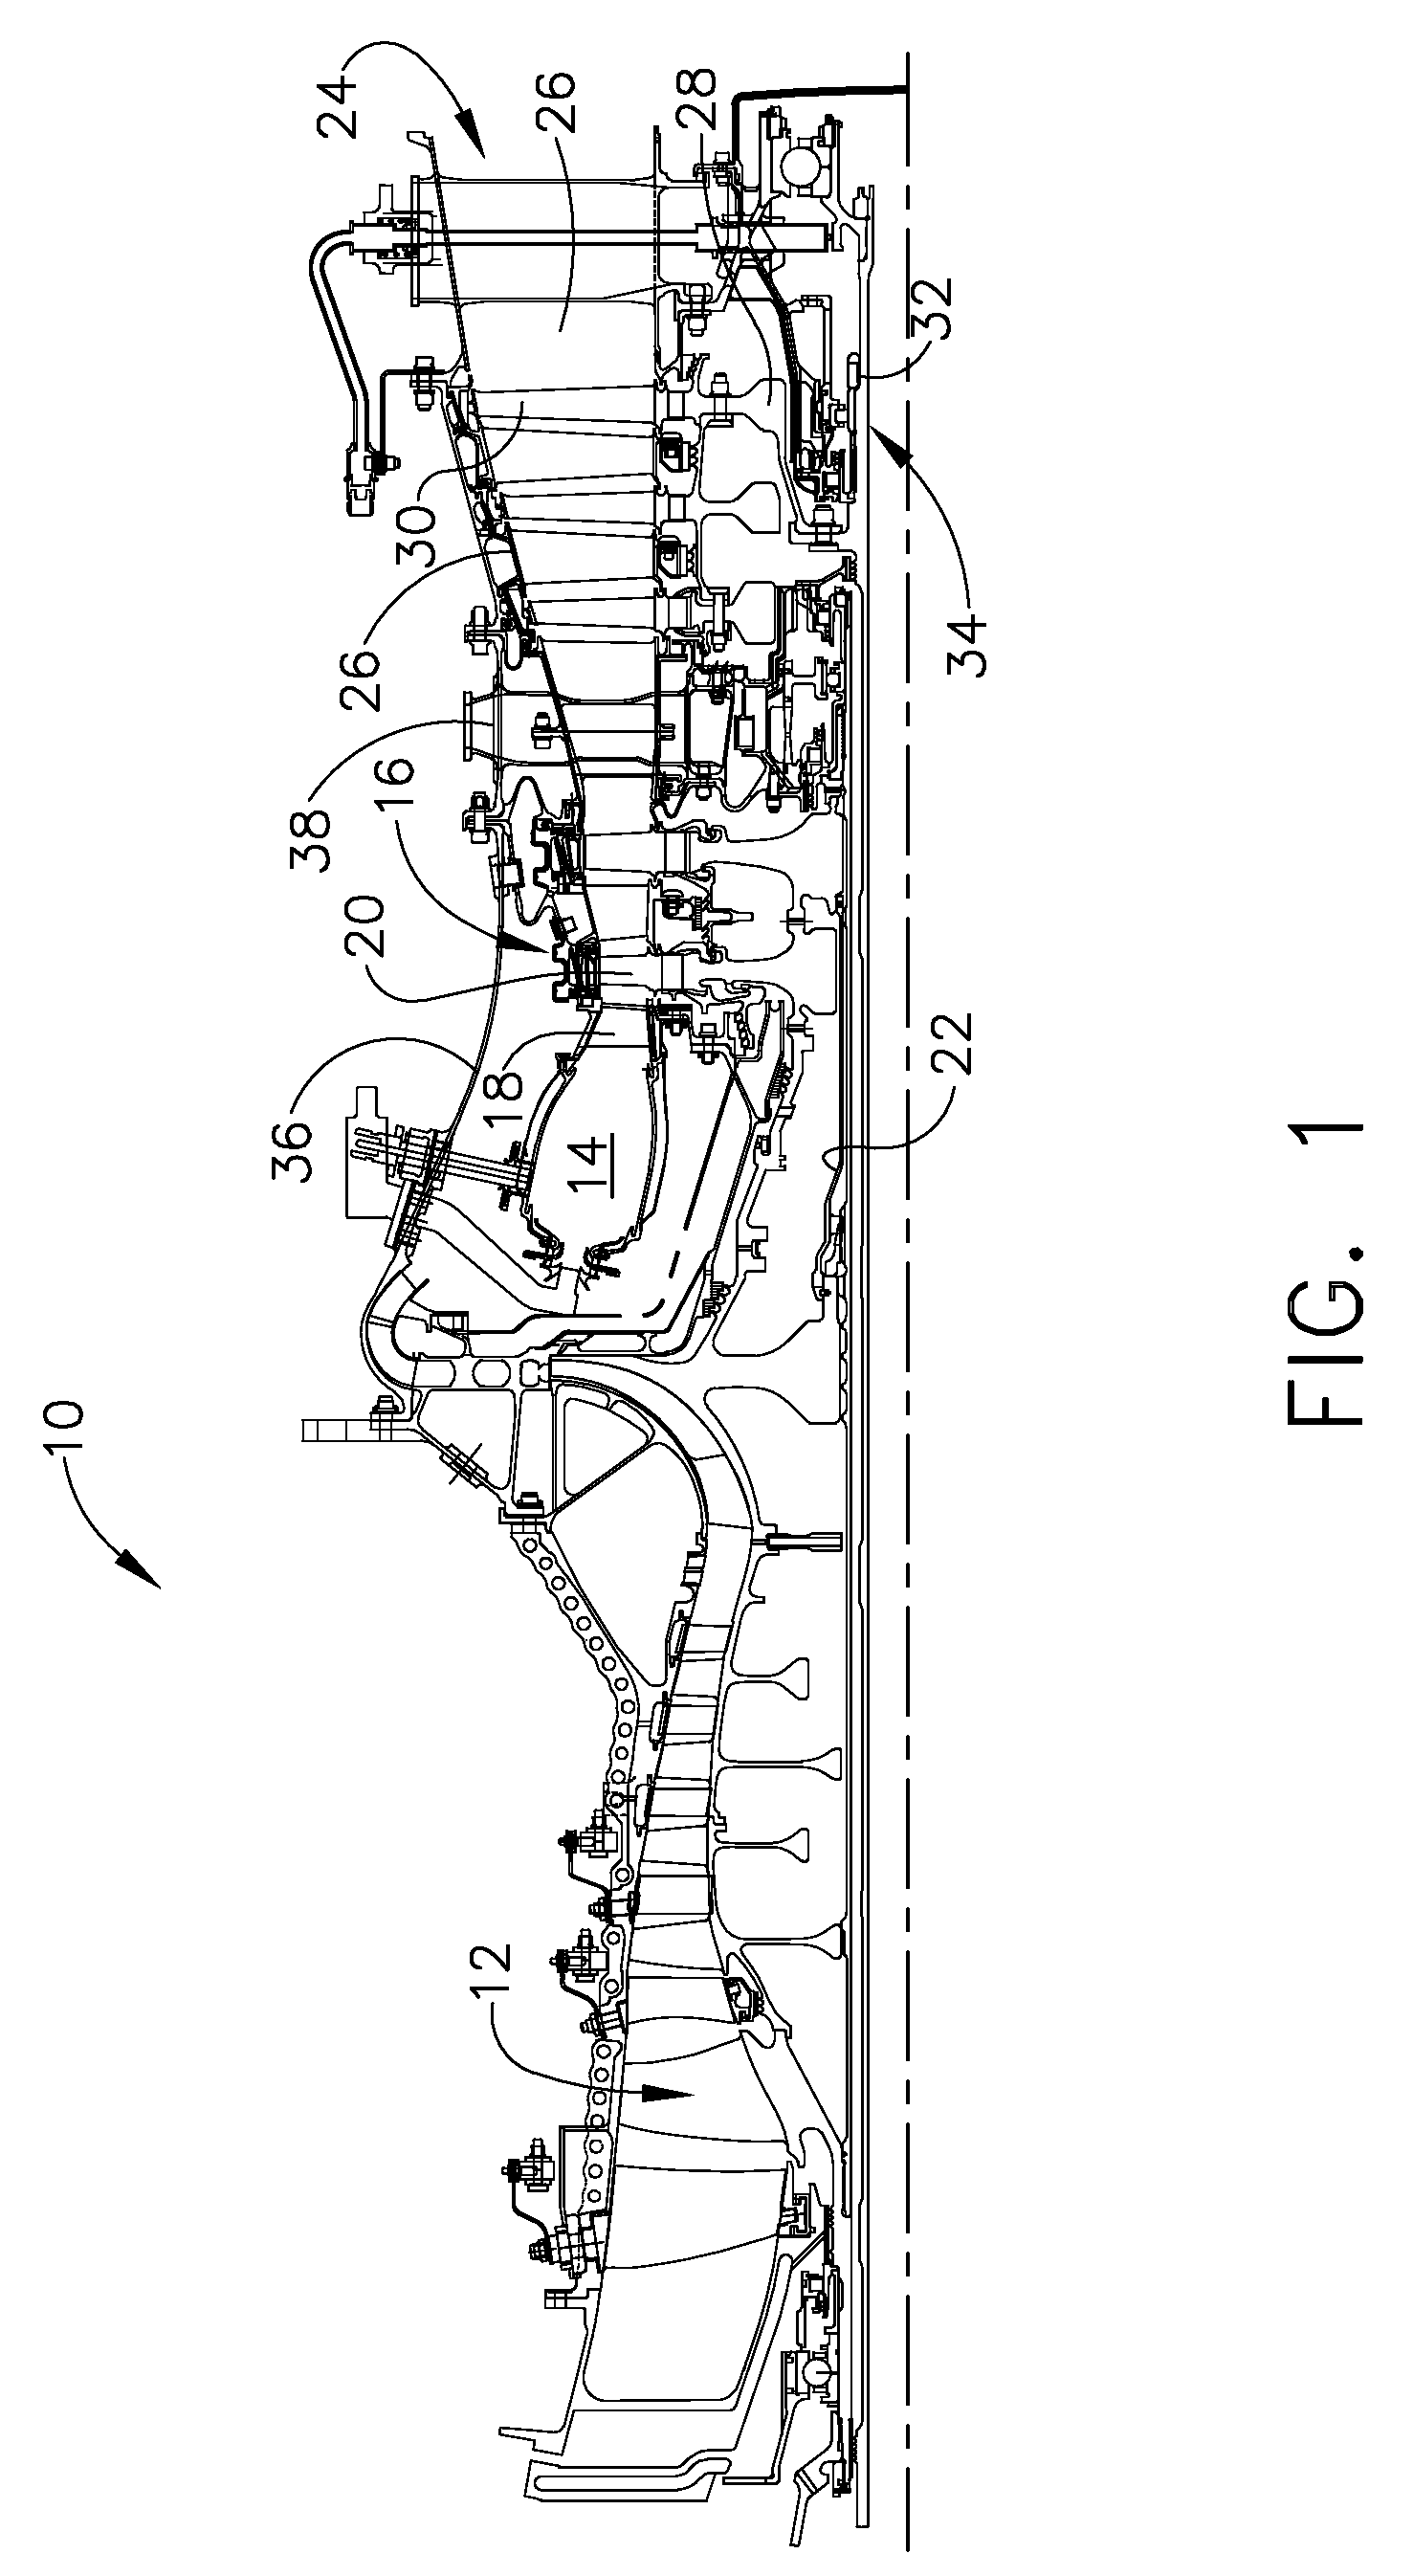 Integrated service tube and impingement baffle for a gas turbine engine